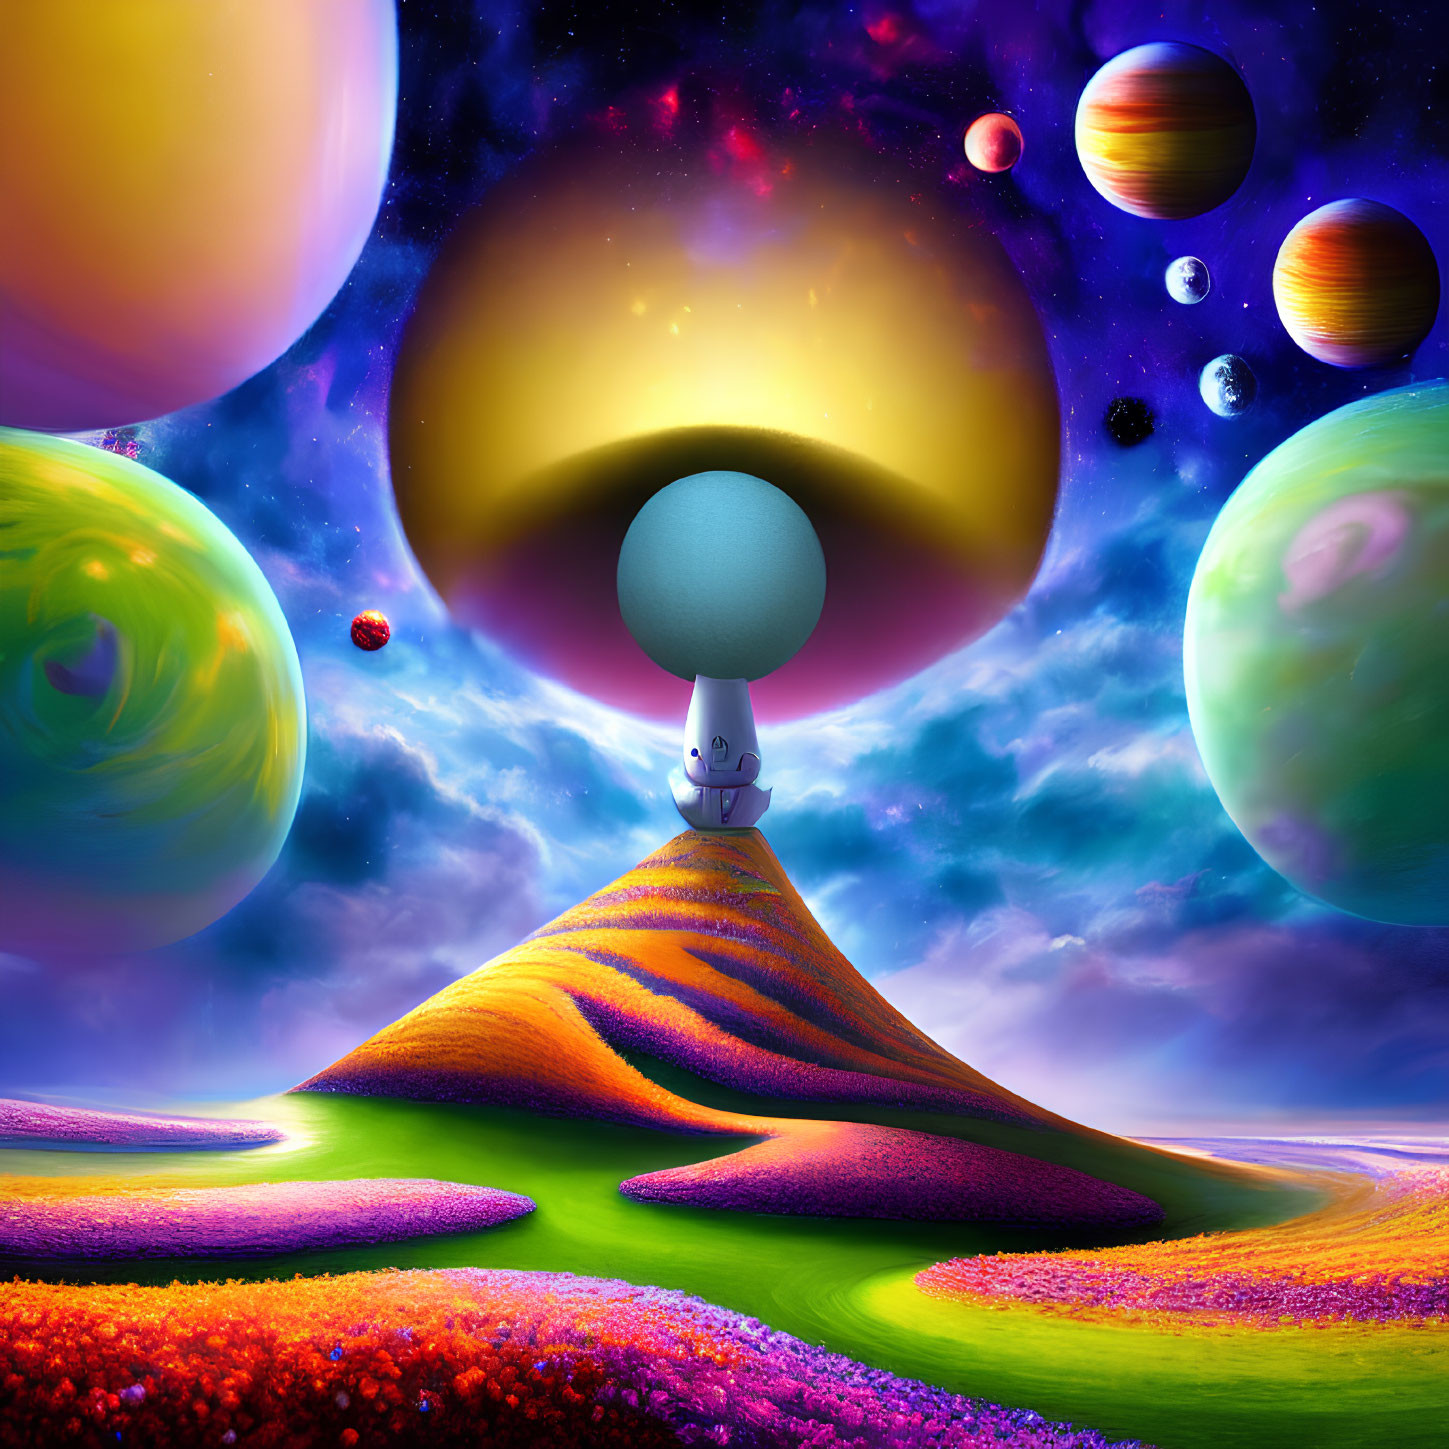 Colorful Landscape with Character and Planets in Dreamlike Sky